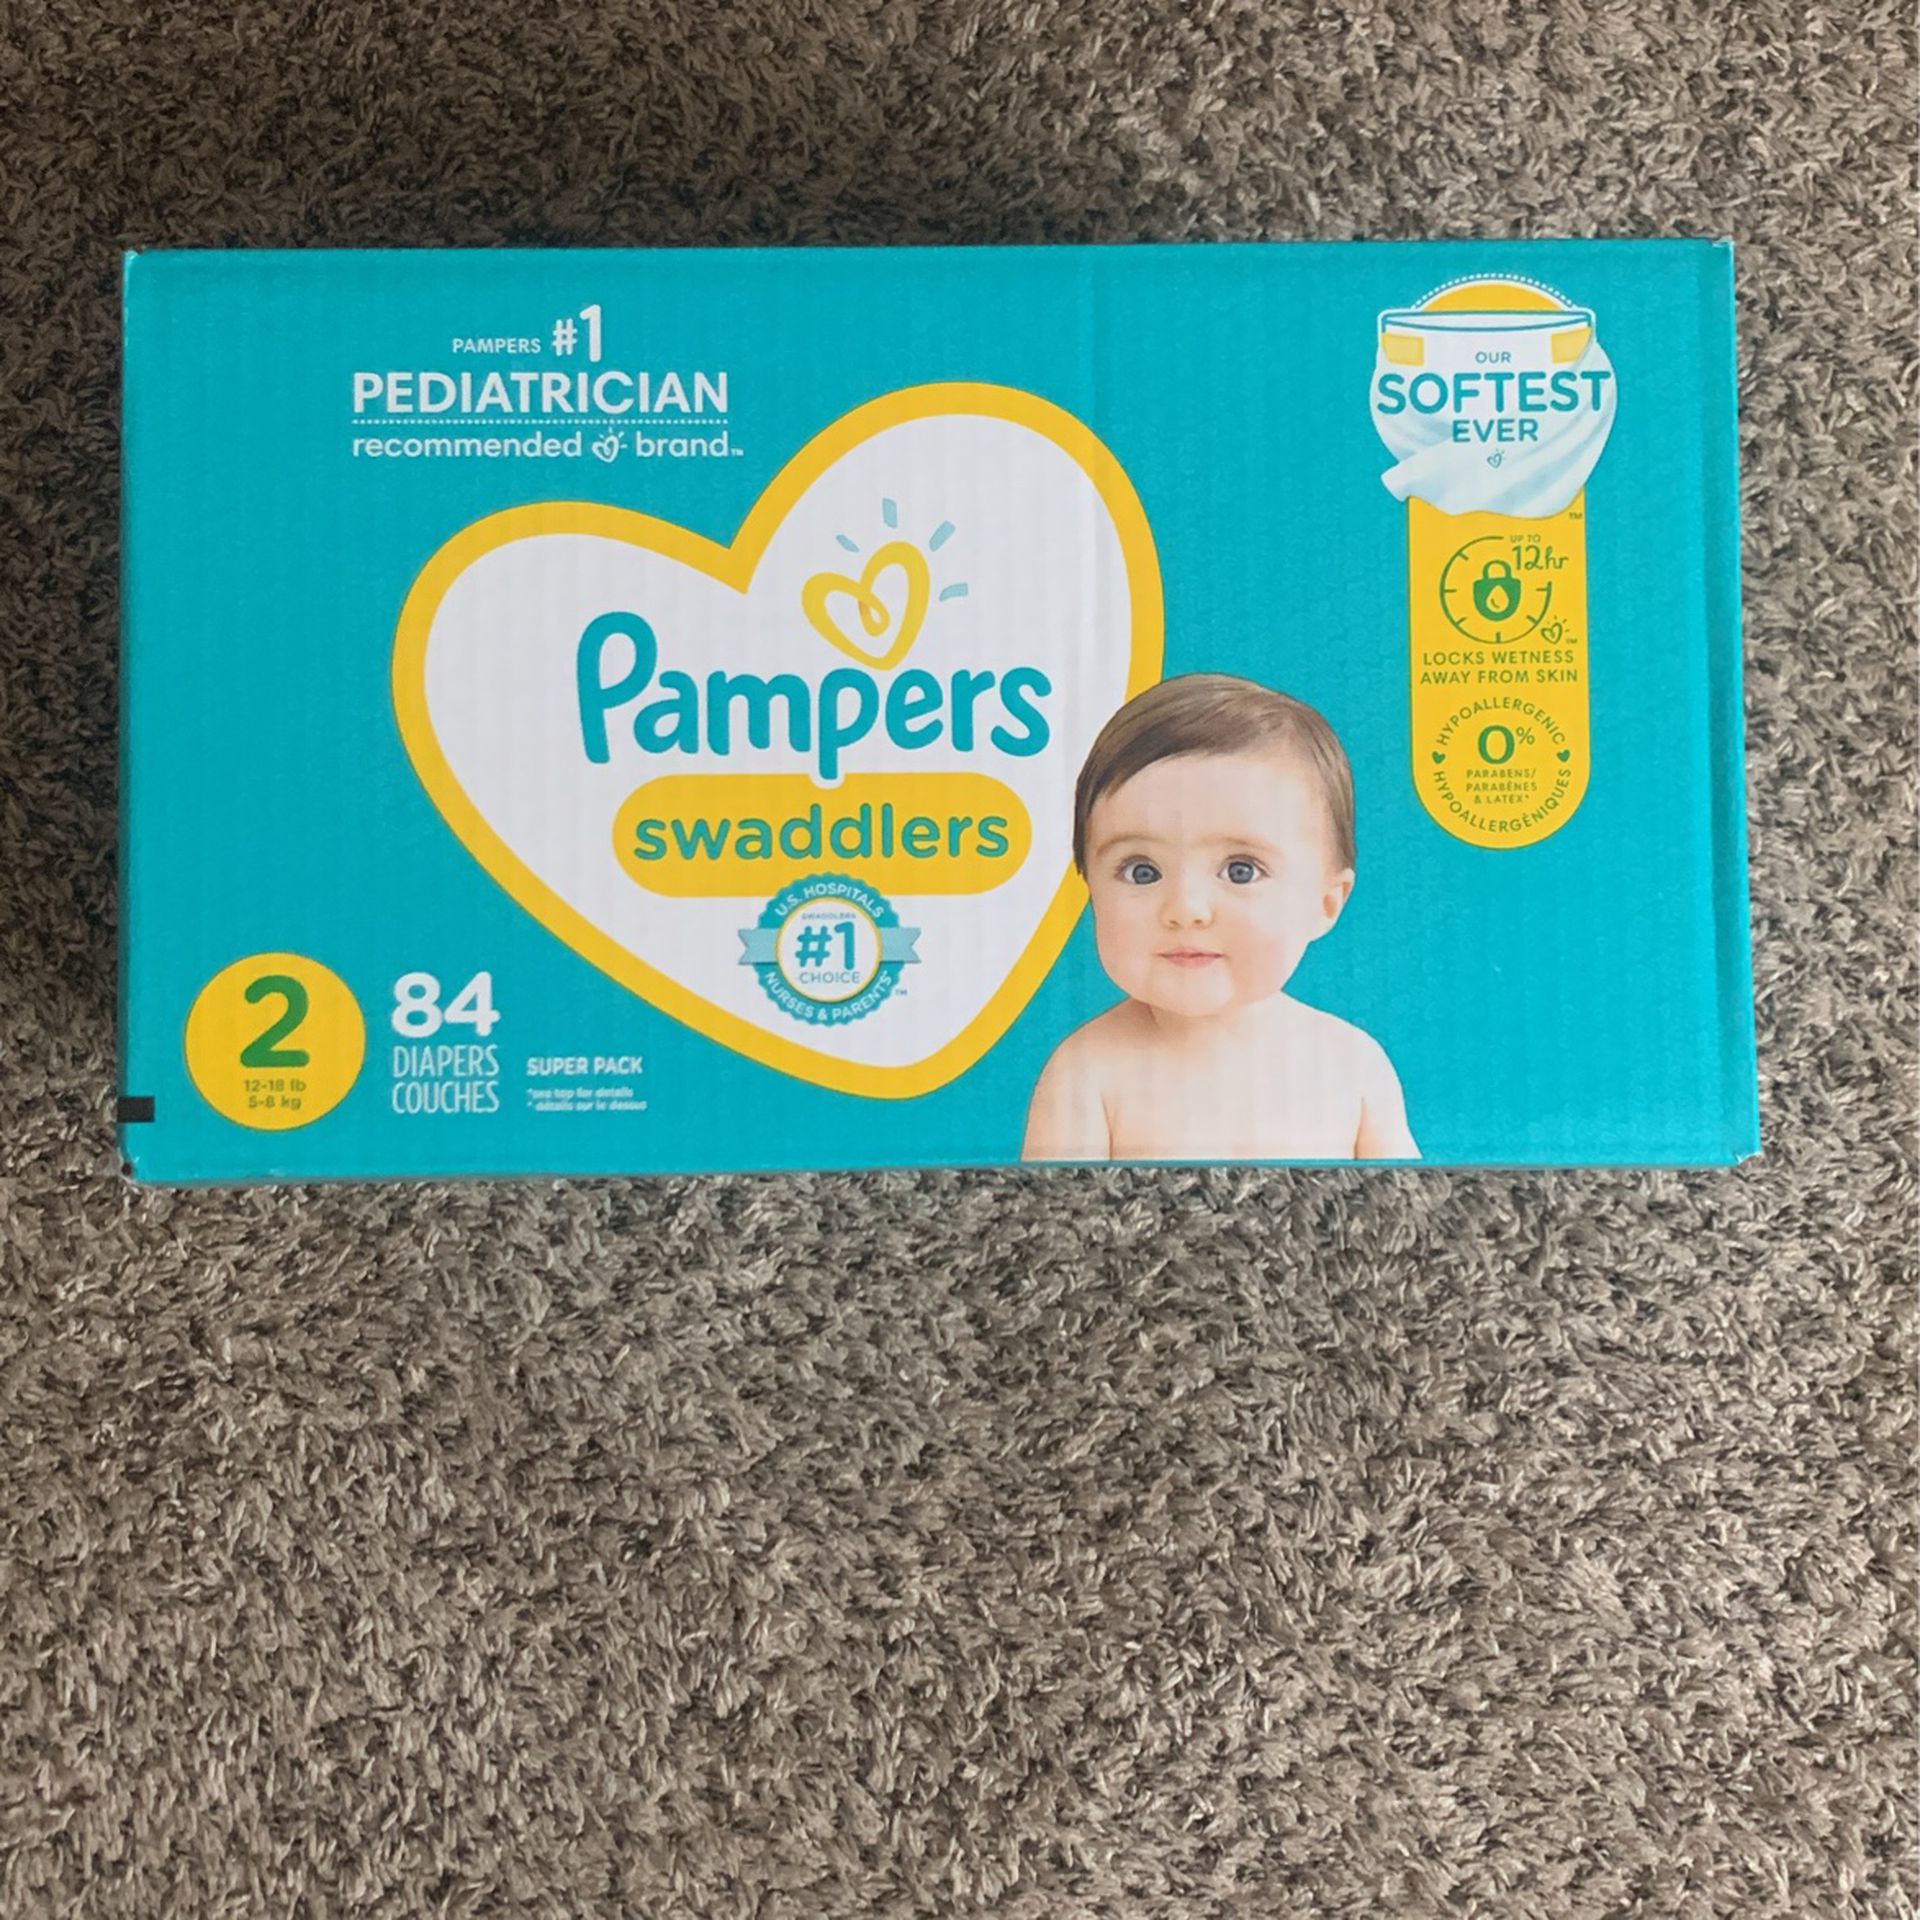 Pampers Swaddlers Size 2.